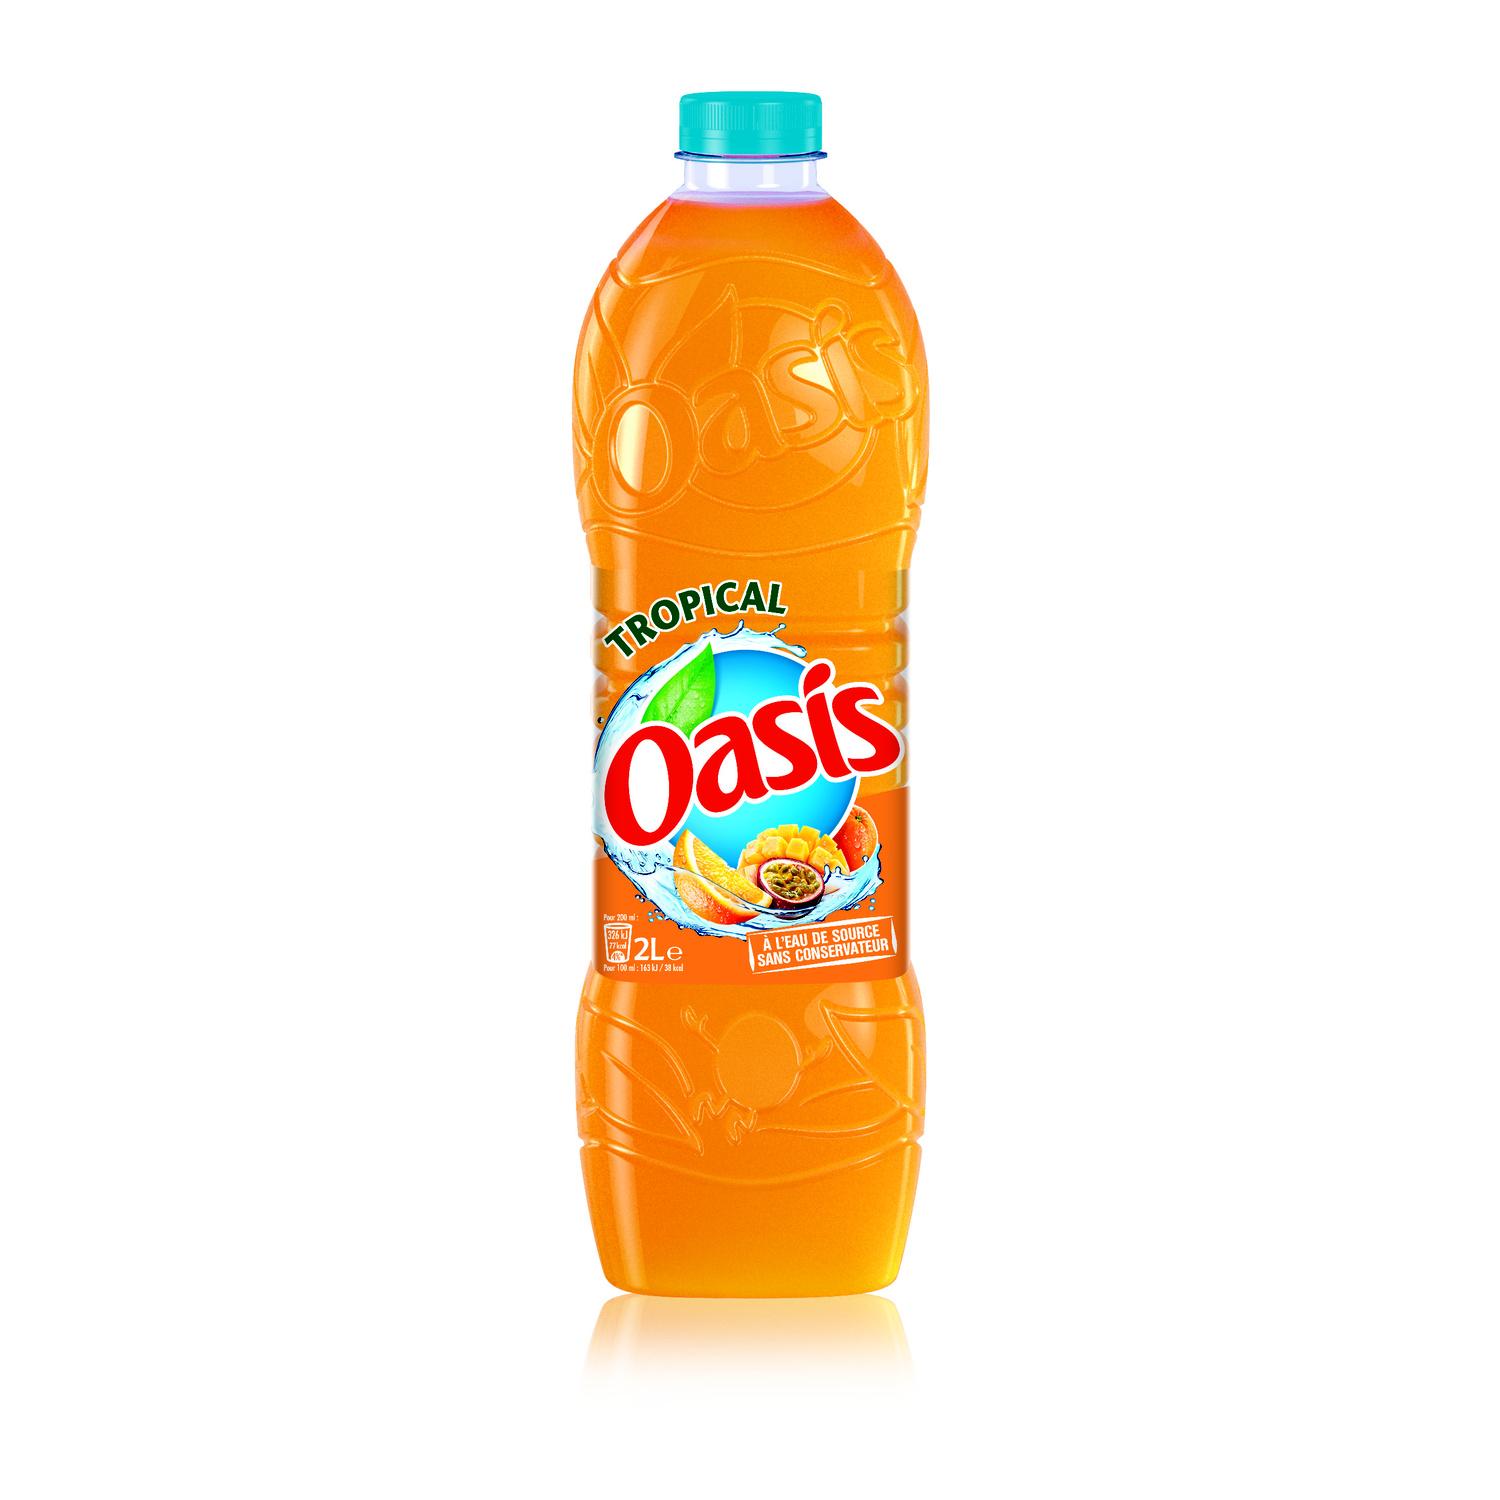 Oasis Tropical Drink | Buy Online | My French Grocery